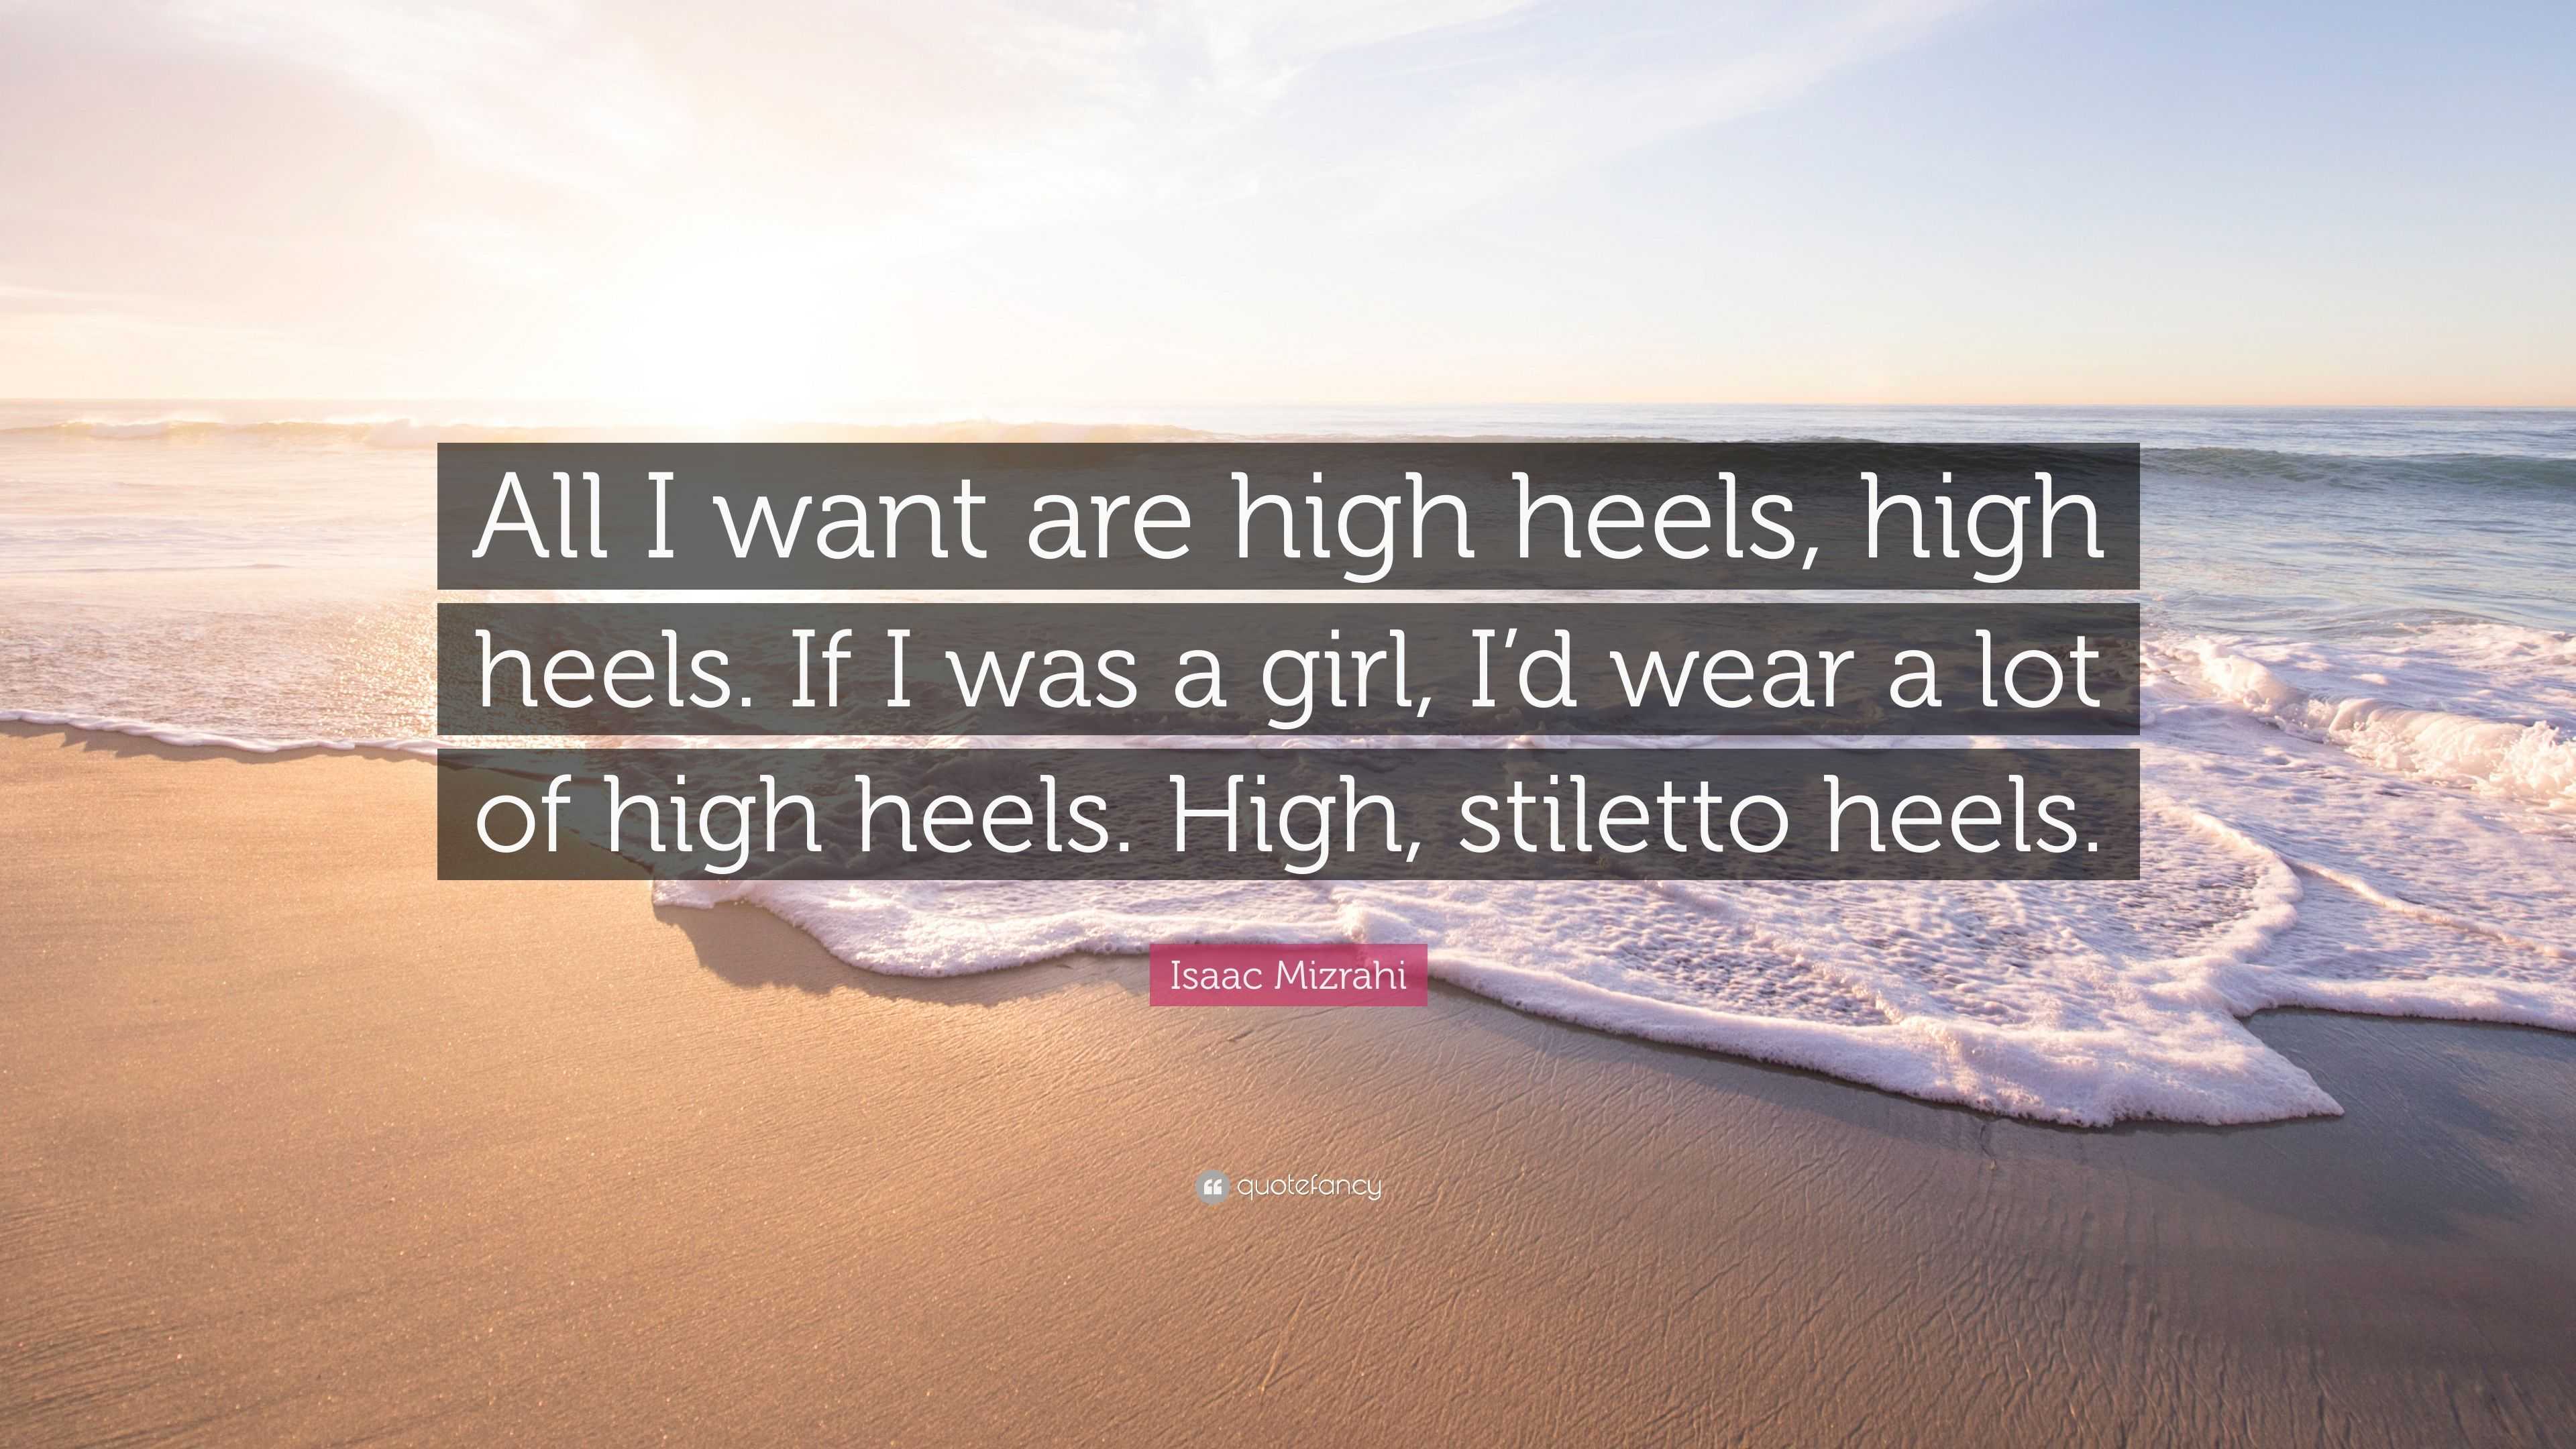 If you're so tall, why are you wearing heels? Aren't you afraid you'll  fall?